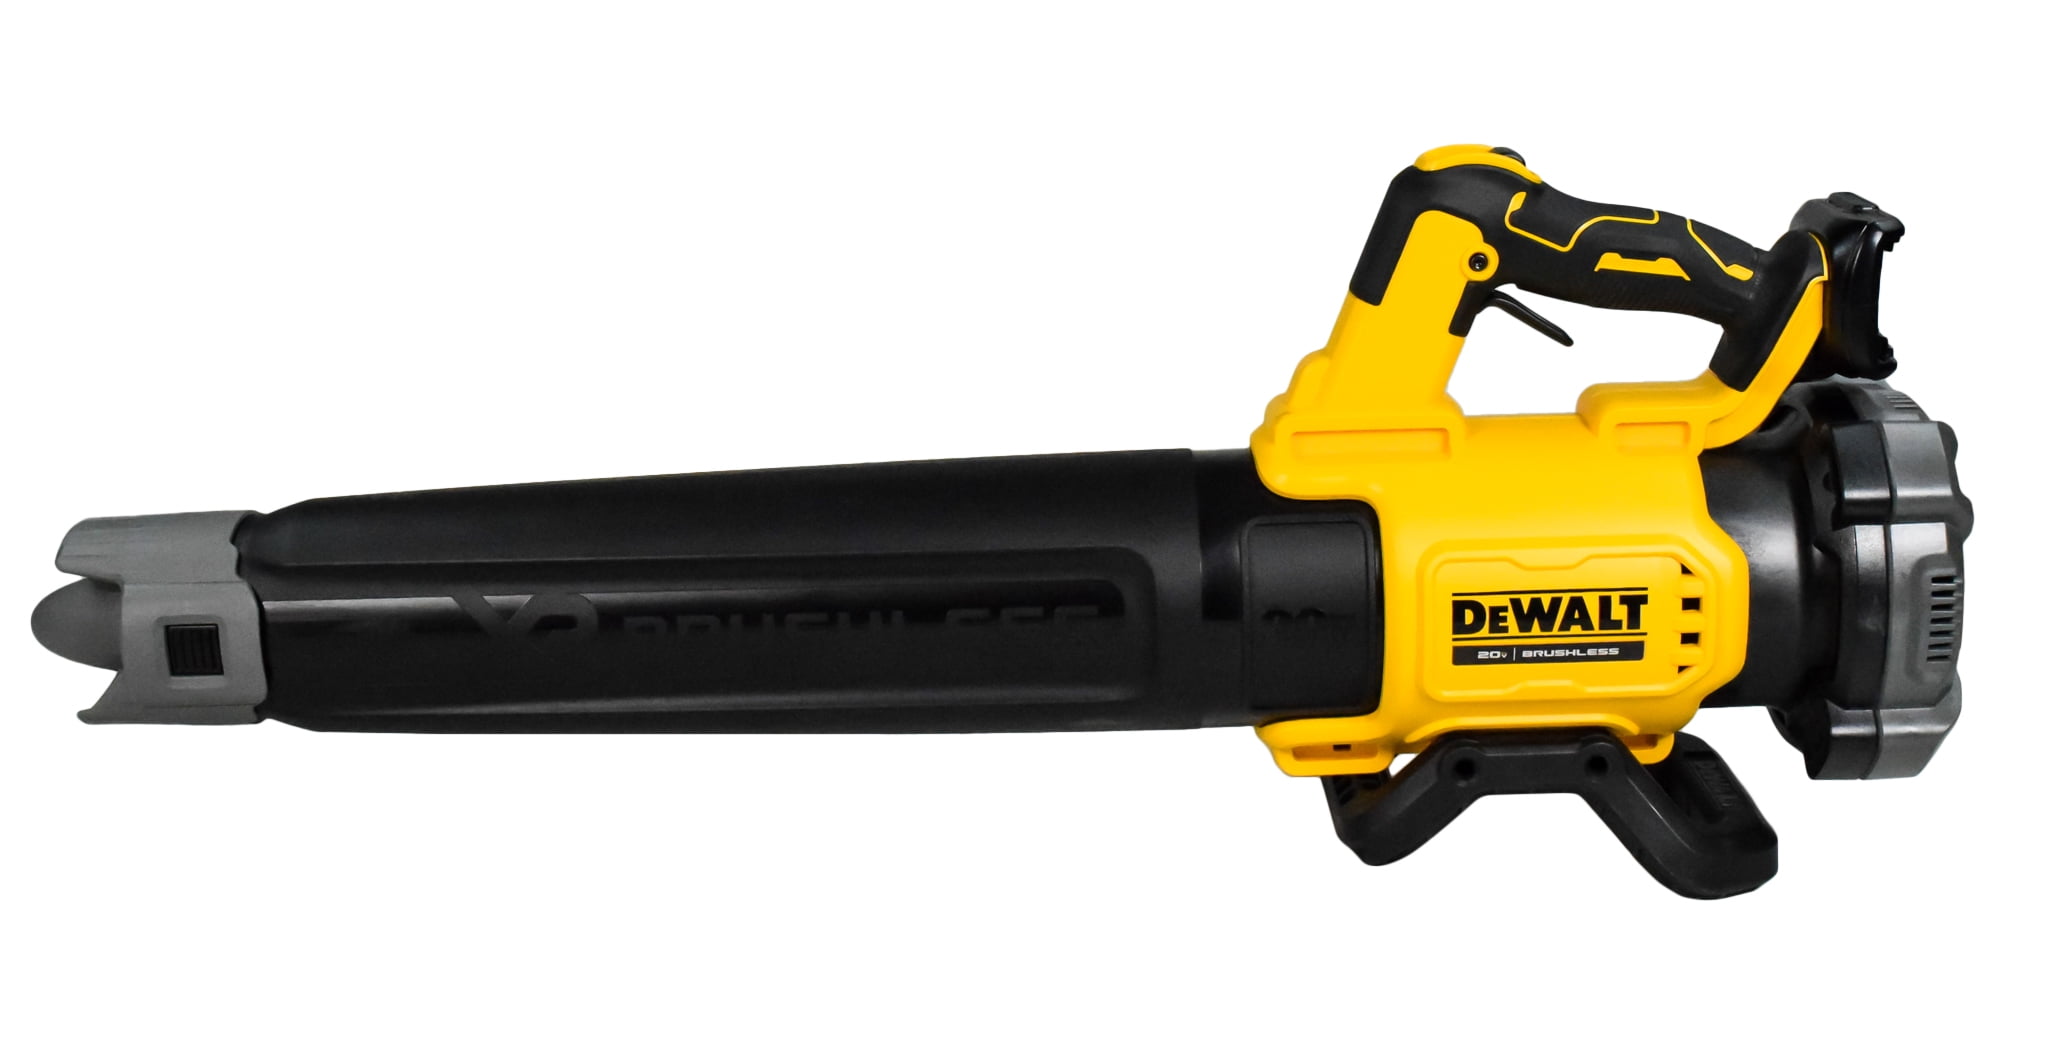 Black & Decker/Outdoor DCBL722B Dewalt 20V Cordless Blower (Tool Only) -  Danbury, CT - New Milford, CT - Agriventures Agway Pickup & Delivery